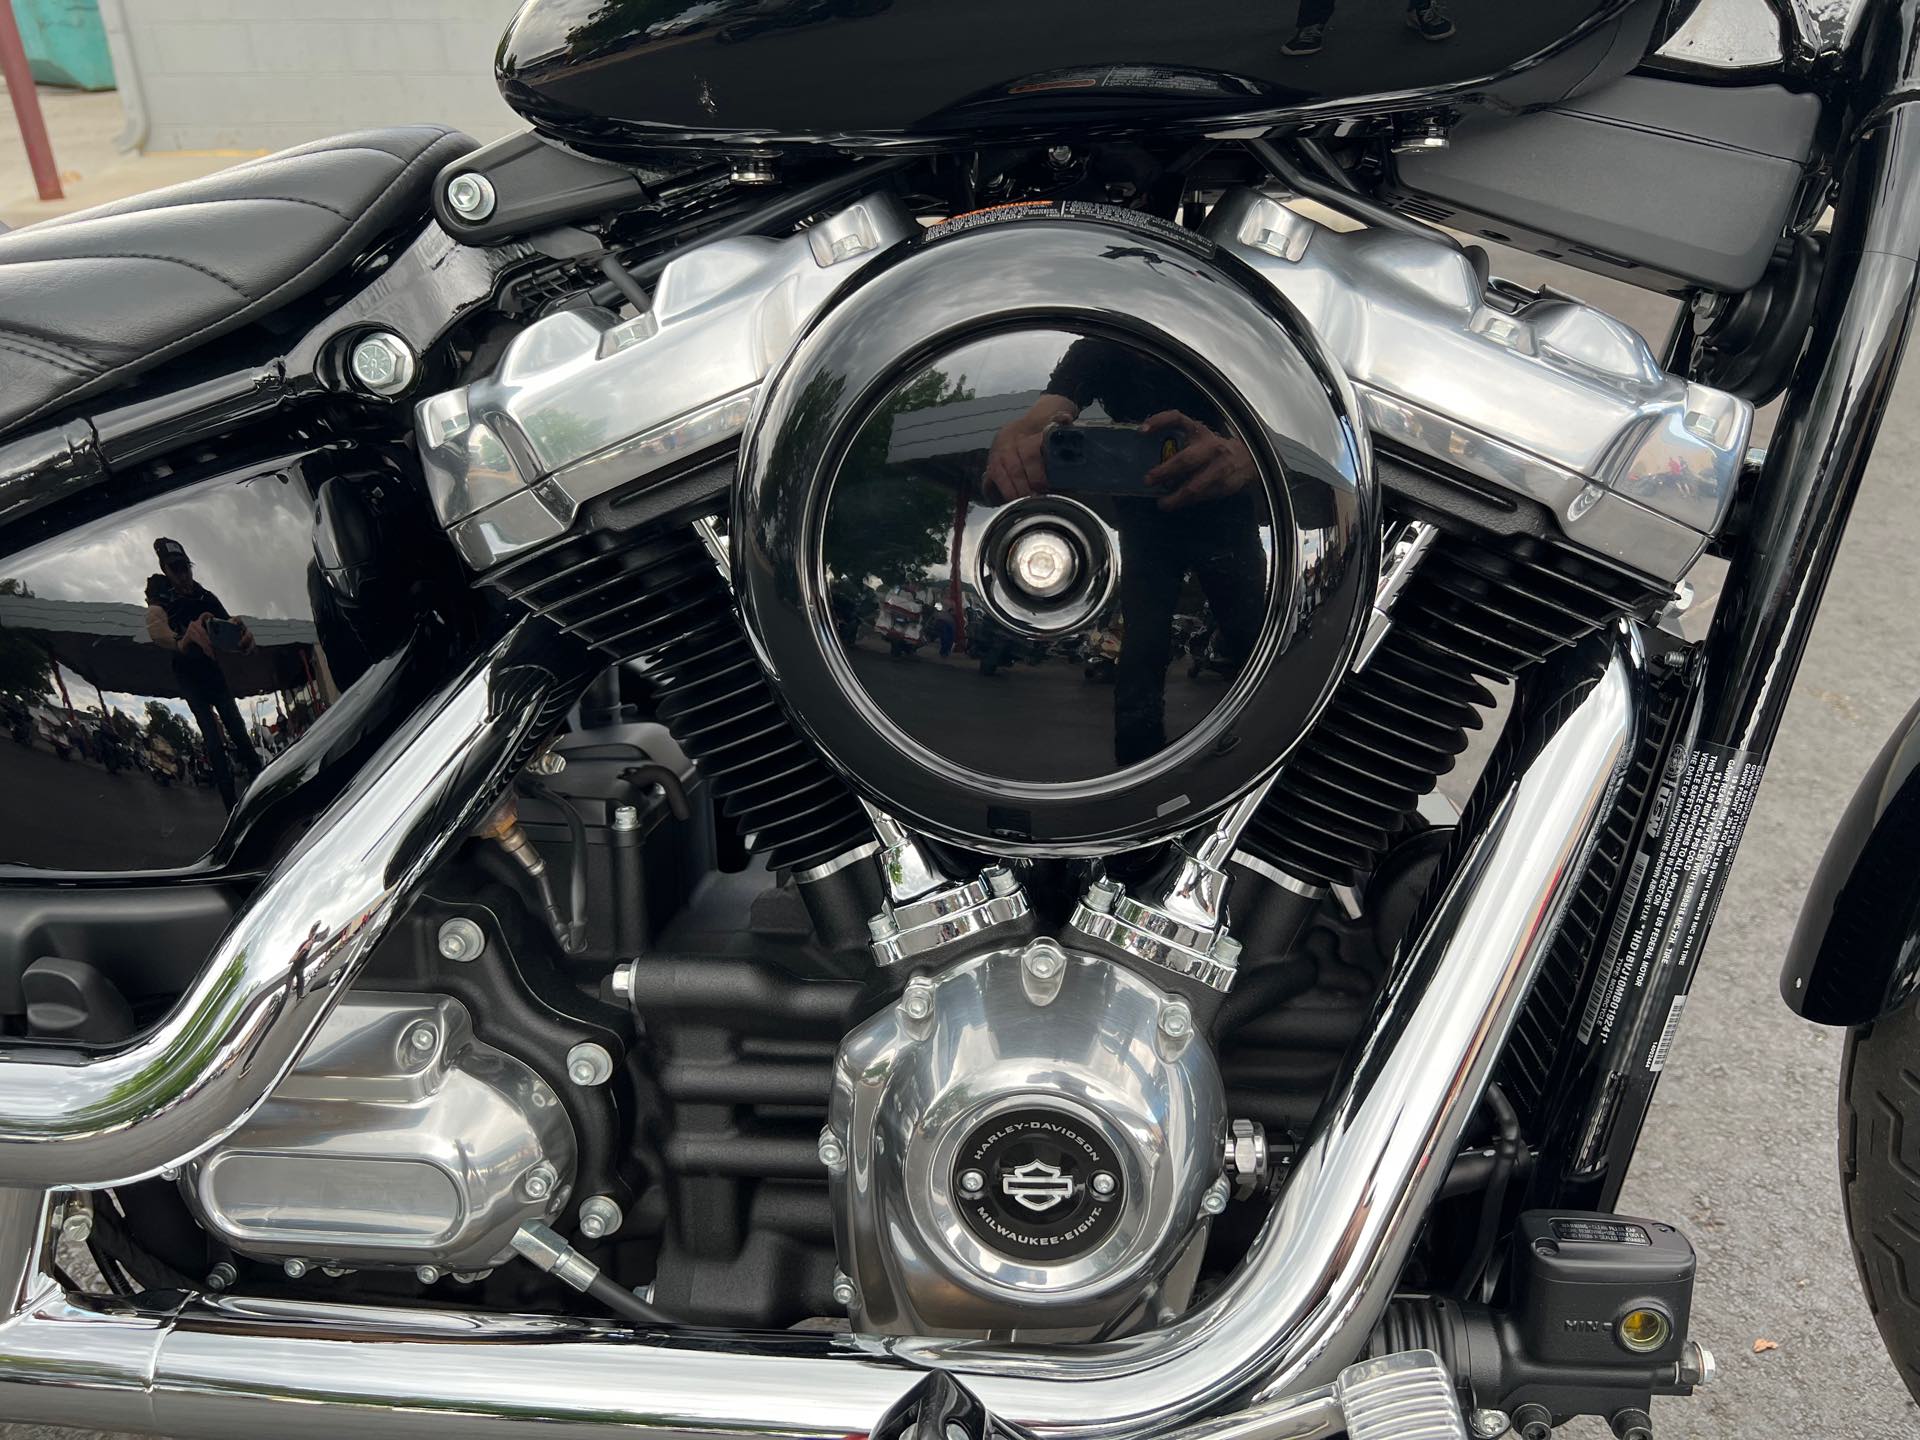 2021 Harley-Davidson Cruiser Softail Standard at Aces Motorcycles - Fort Collins